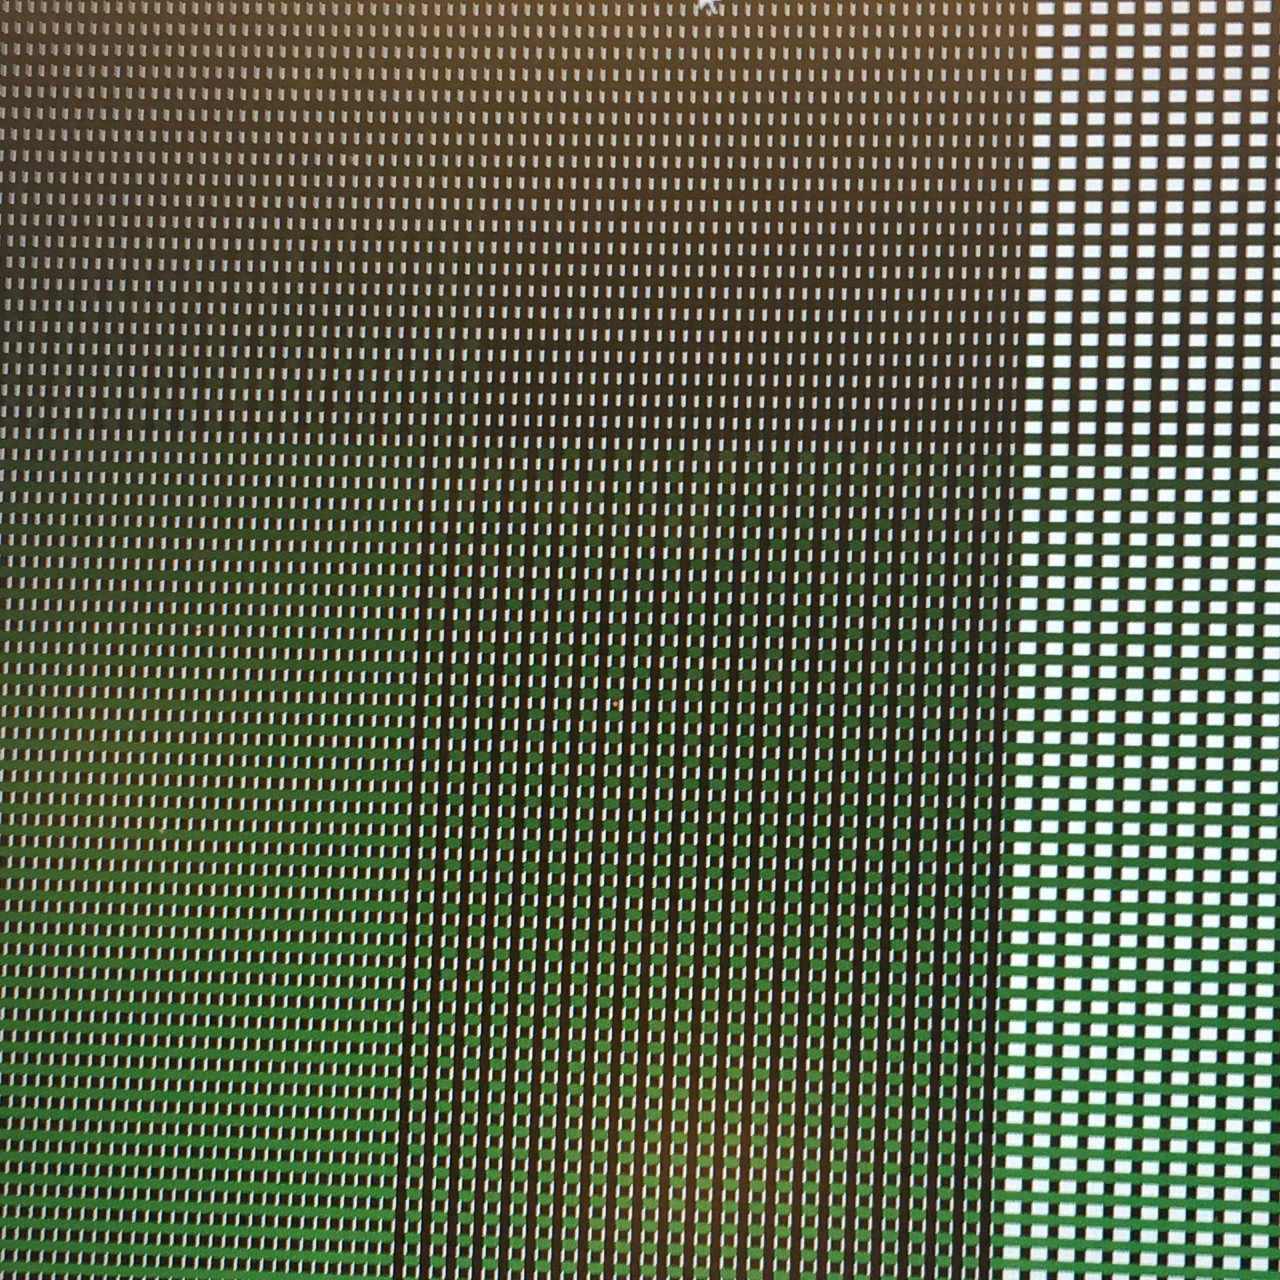 Tweed-like pattern on a computer screen in green, black and white